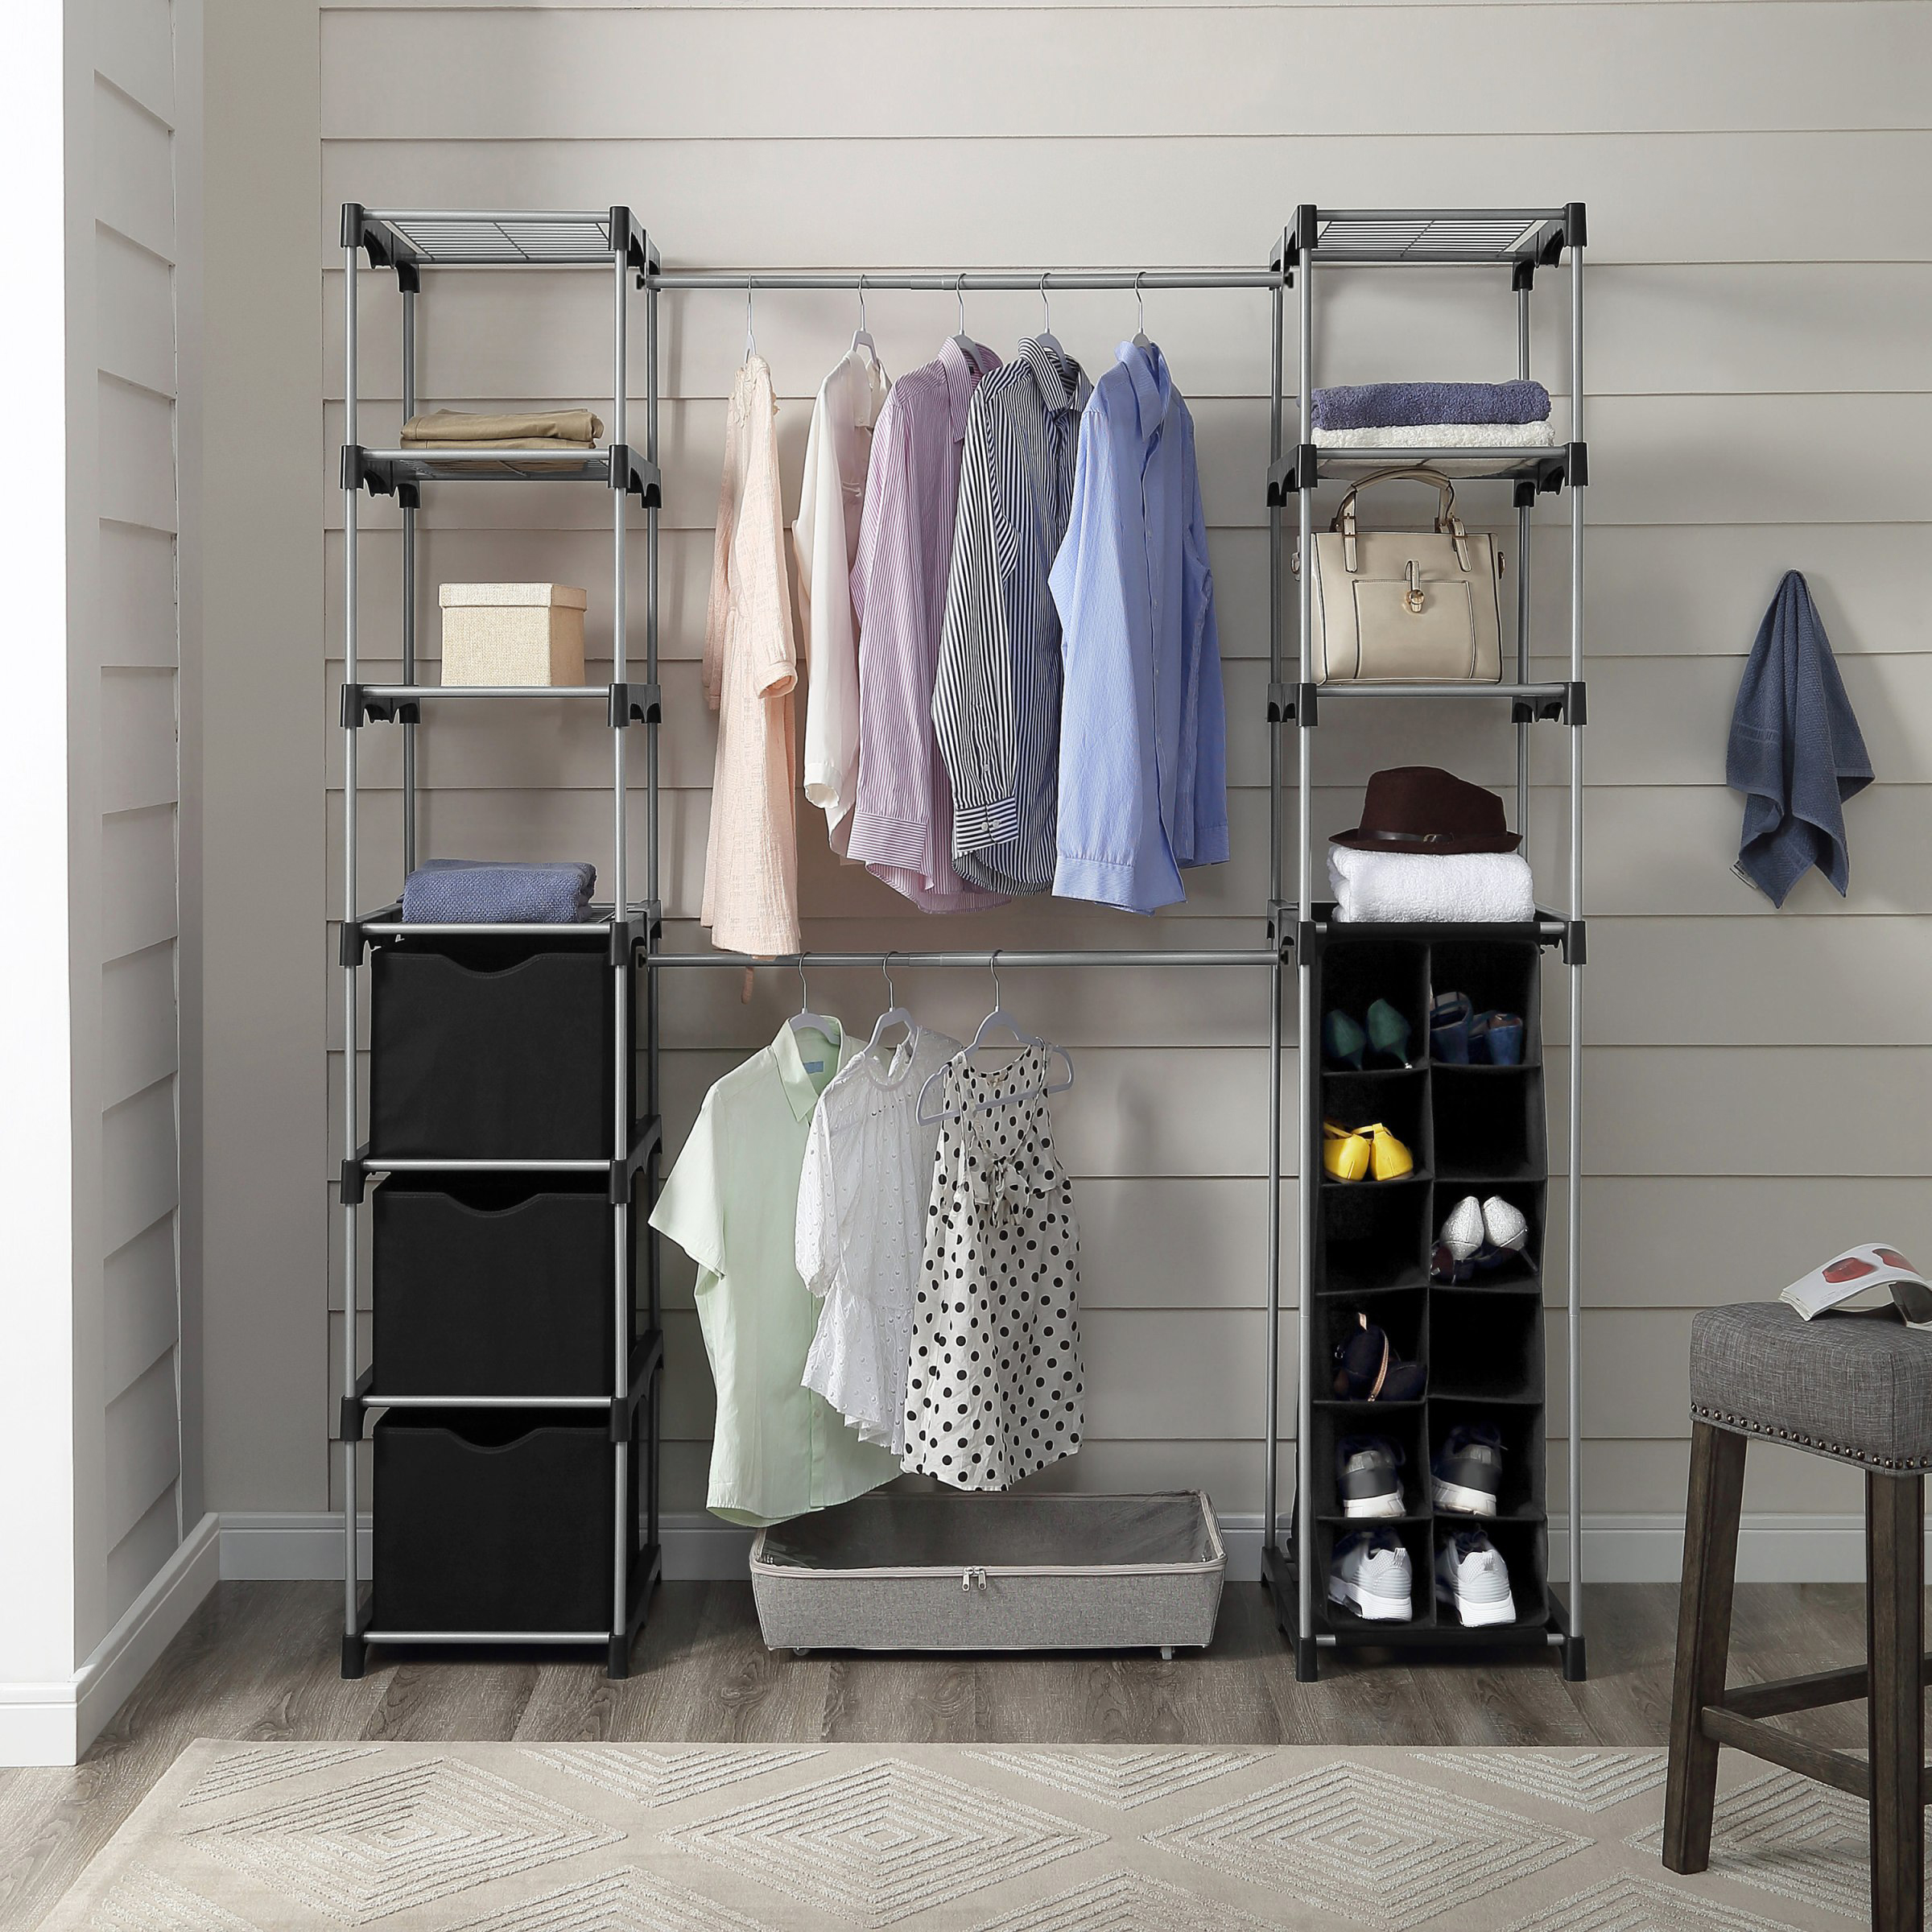 Mainstays  Non-Woven Closet Organizer, 2-Tower 9-Shelves, Easy to Assemble, Black - image 3 of 6